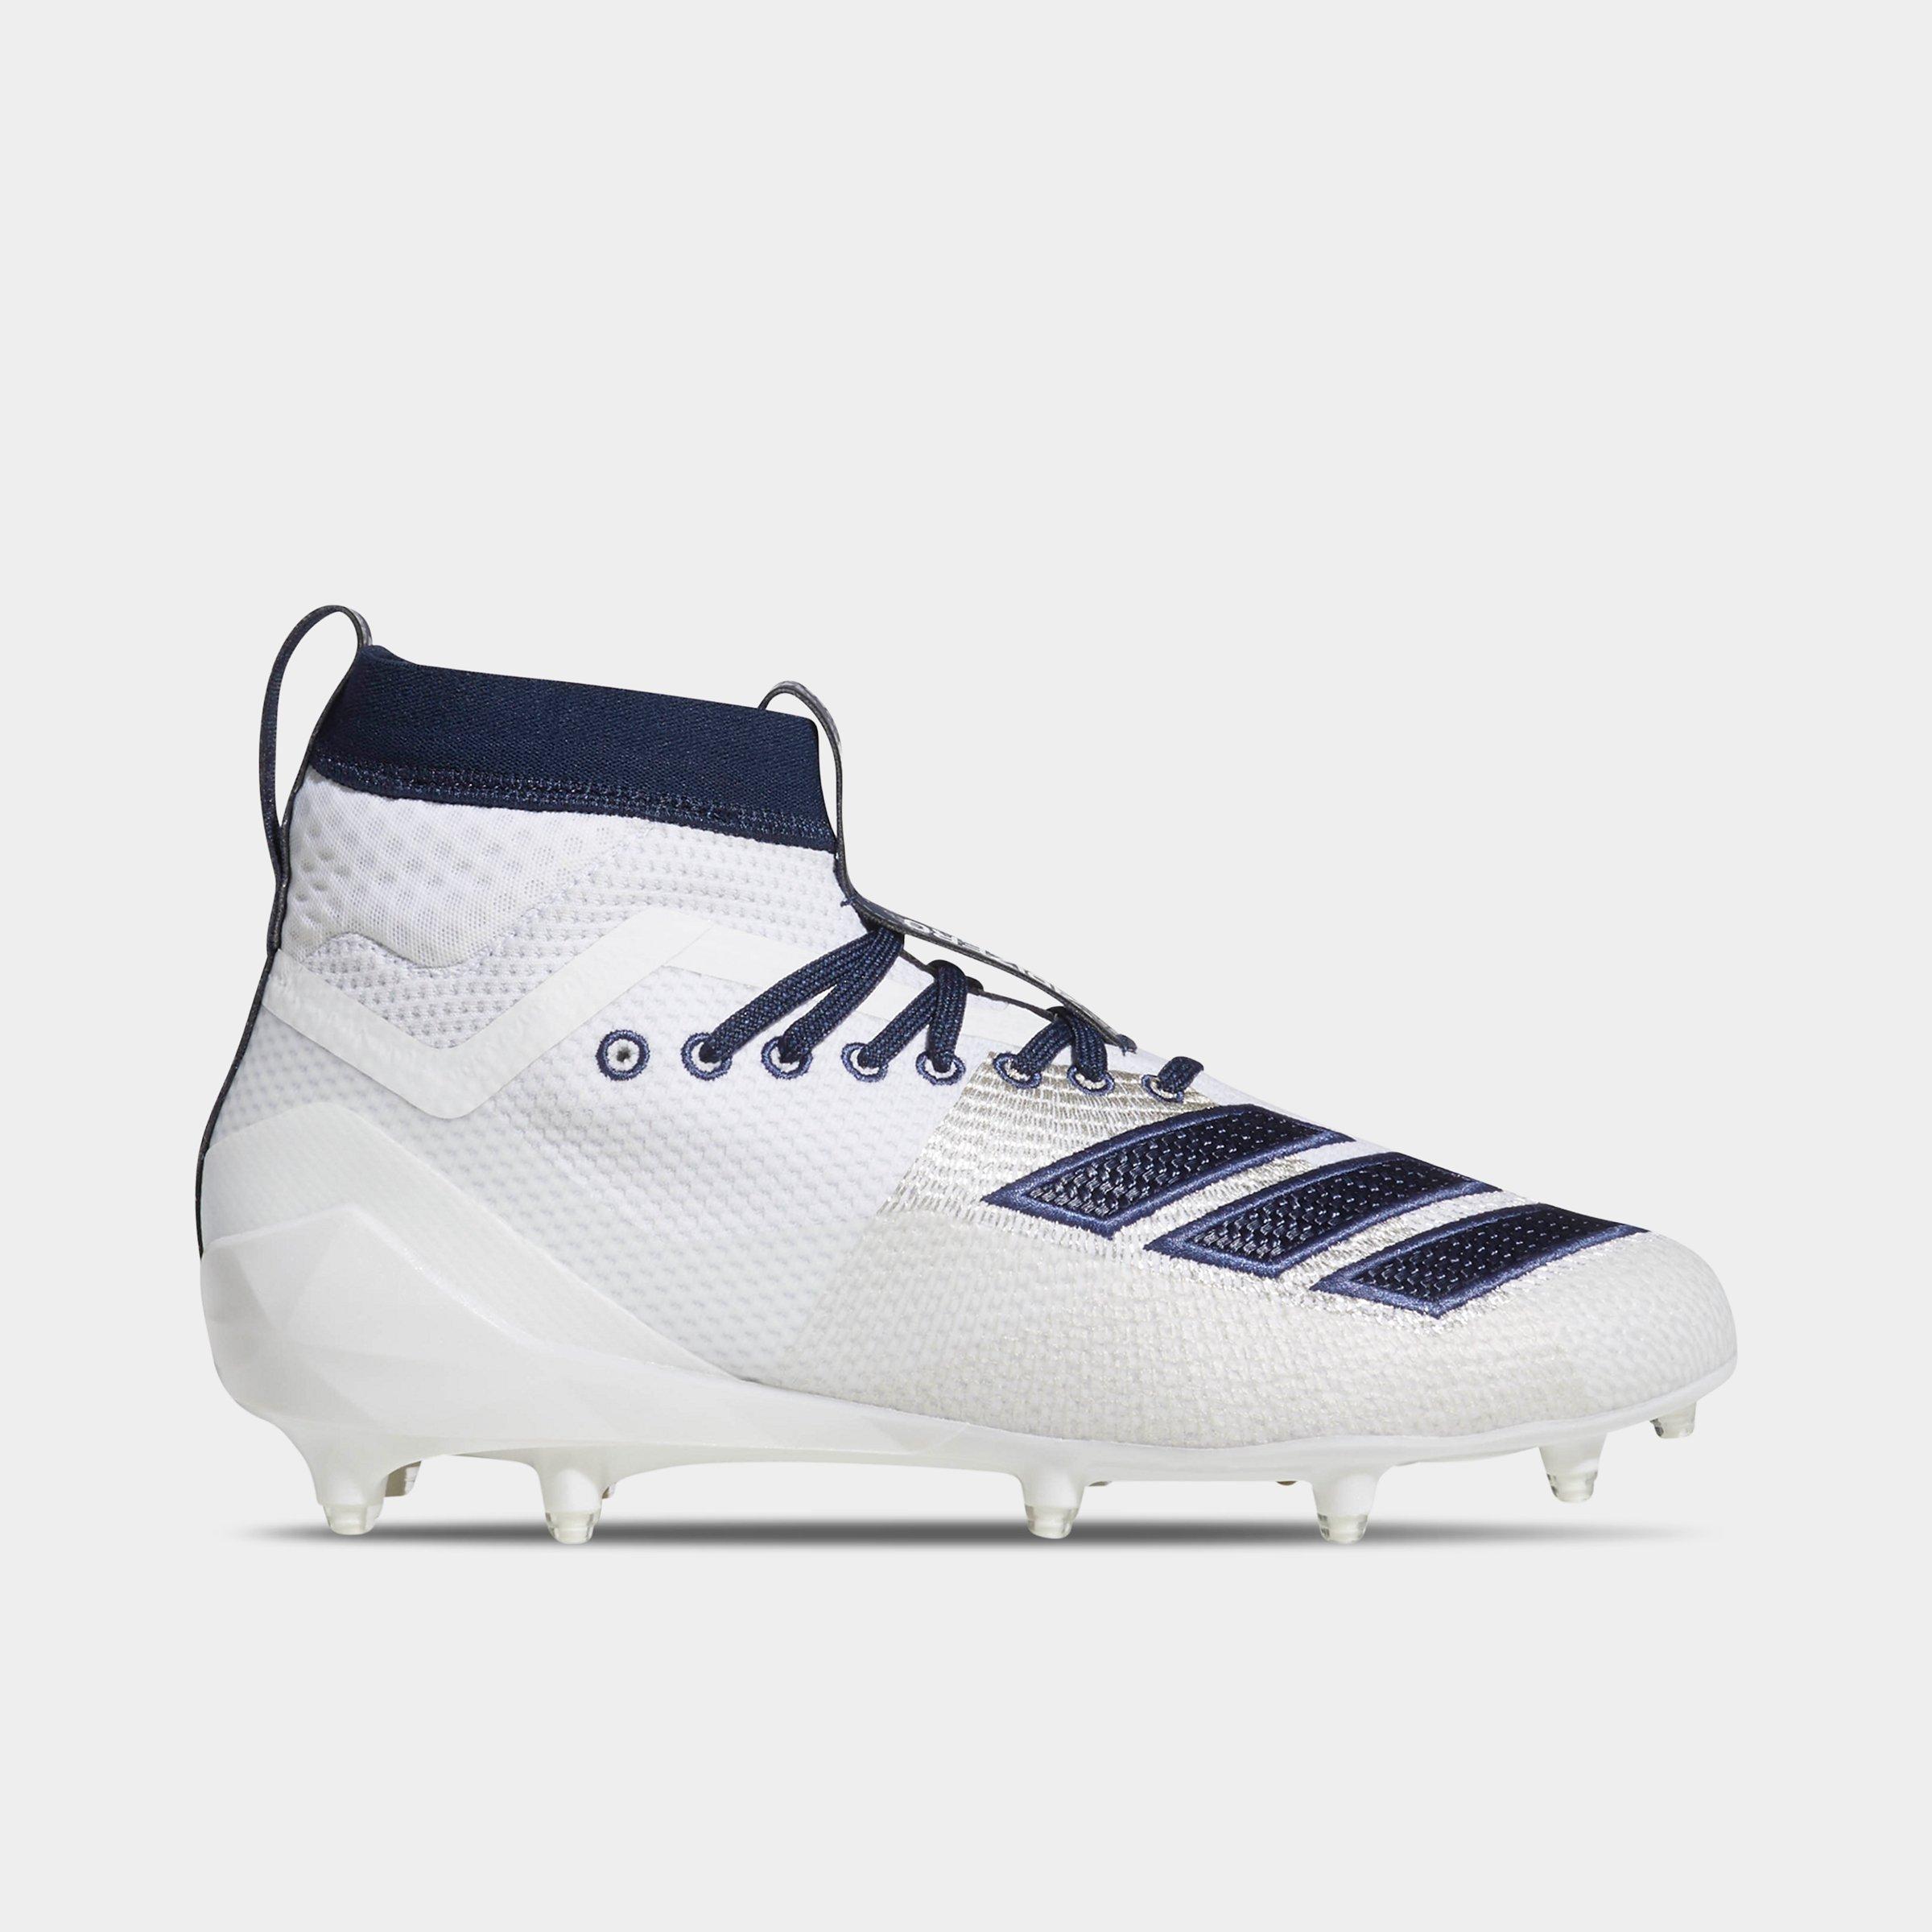 8.0 cleats